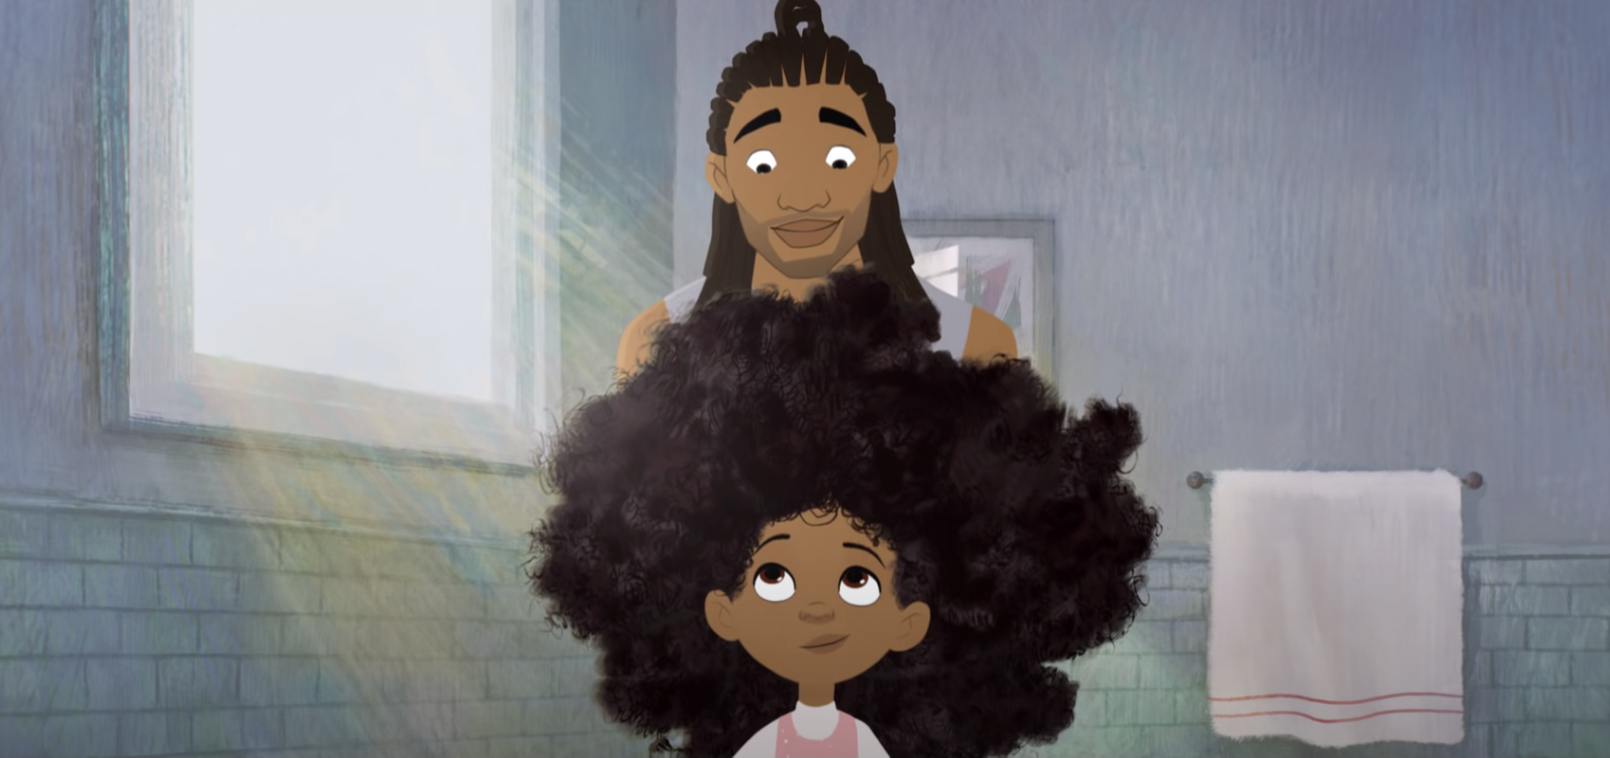 A Black man with shoulder-length locks smiles down at his daughter, a young Black girl with unstyled natural hair.